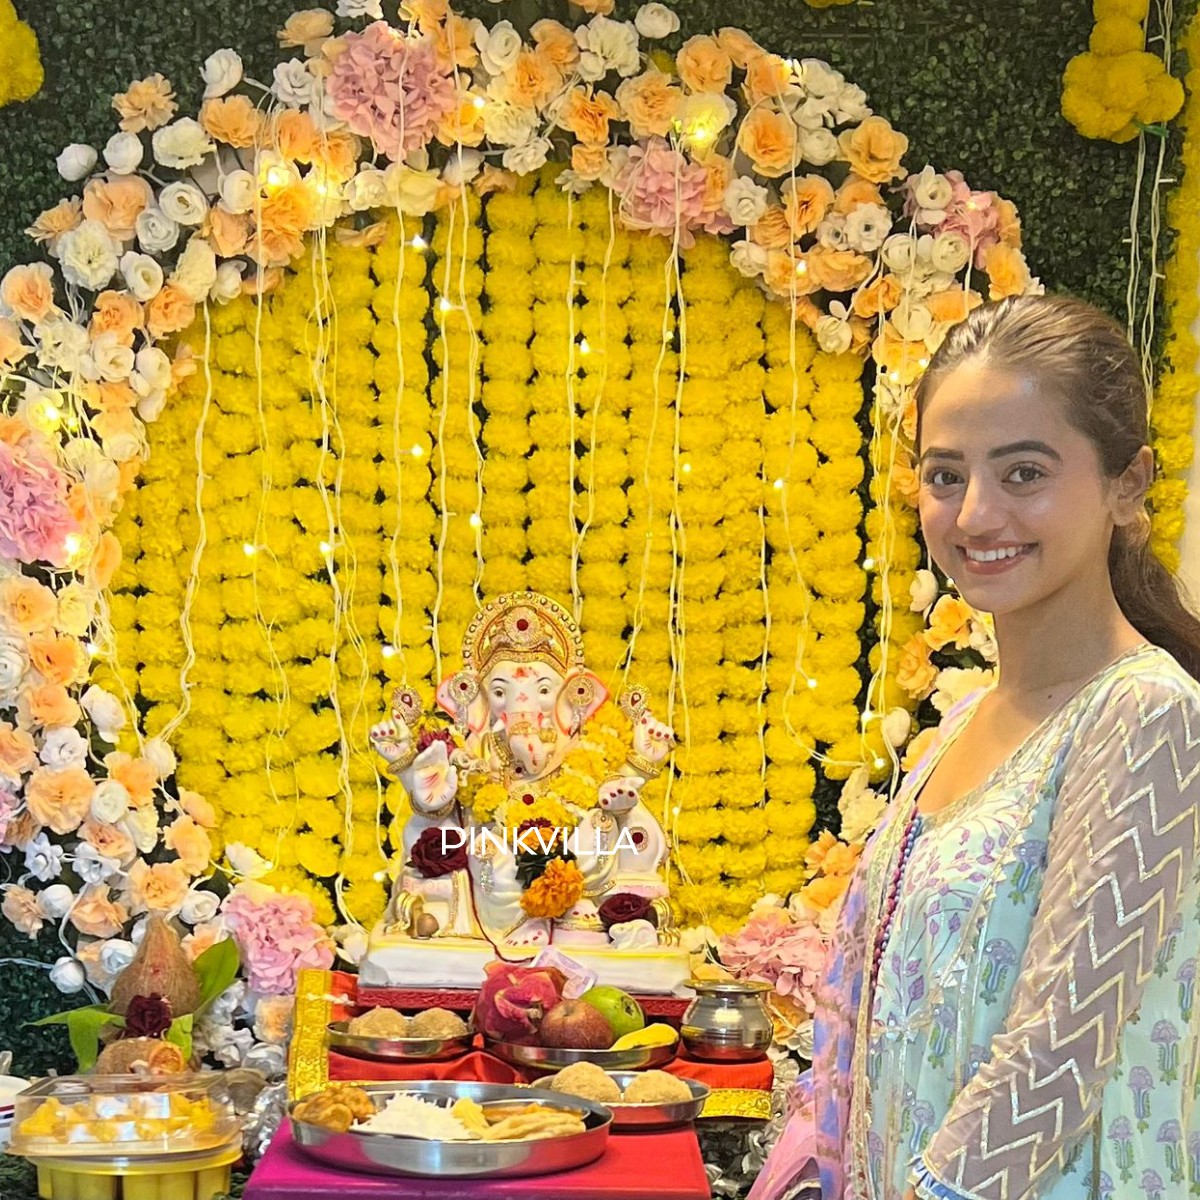 Ganesh Chaturthi EXCLUSIVE: Helly Shah shares she is ‘excited that Bappa is coming to my home this year’